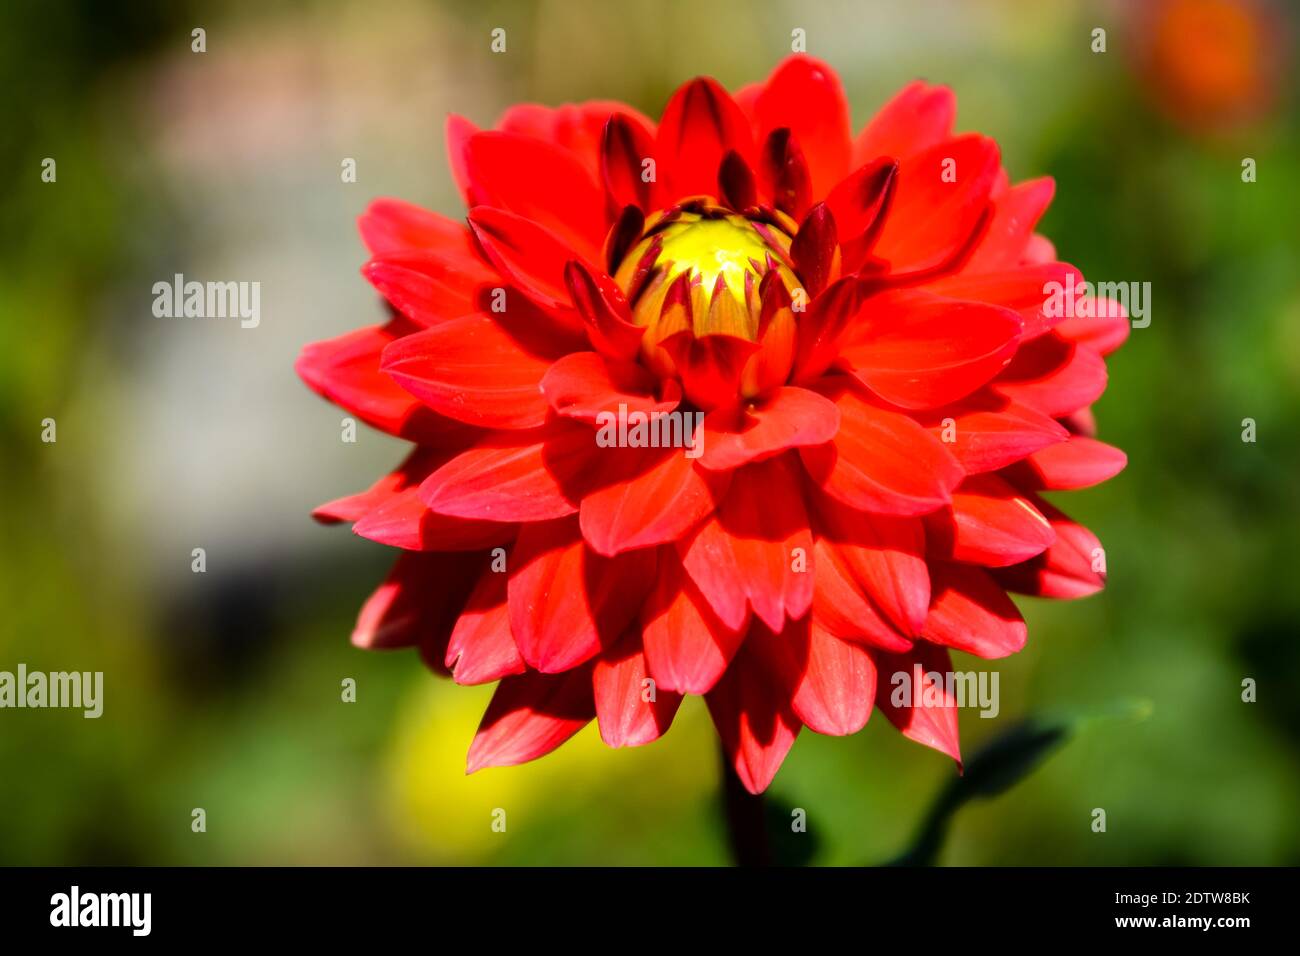 Beautiful red dahlia flower. Selective focus on flower. Stock Photo